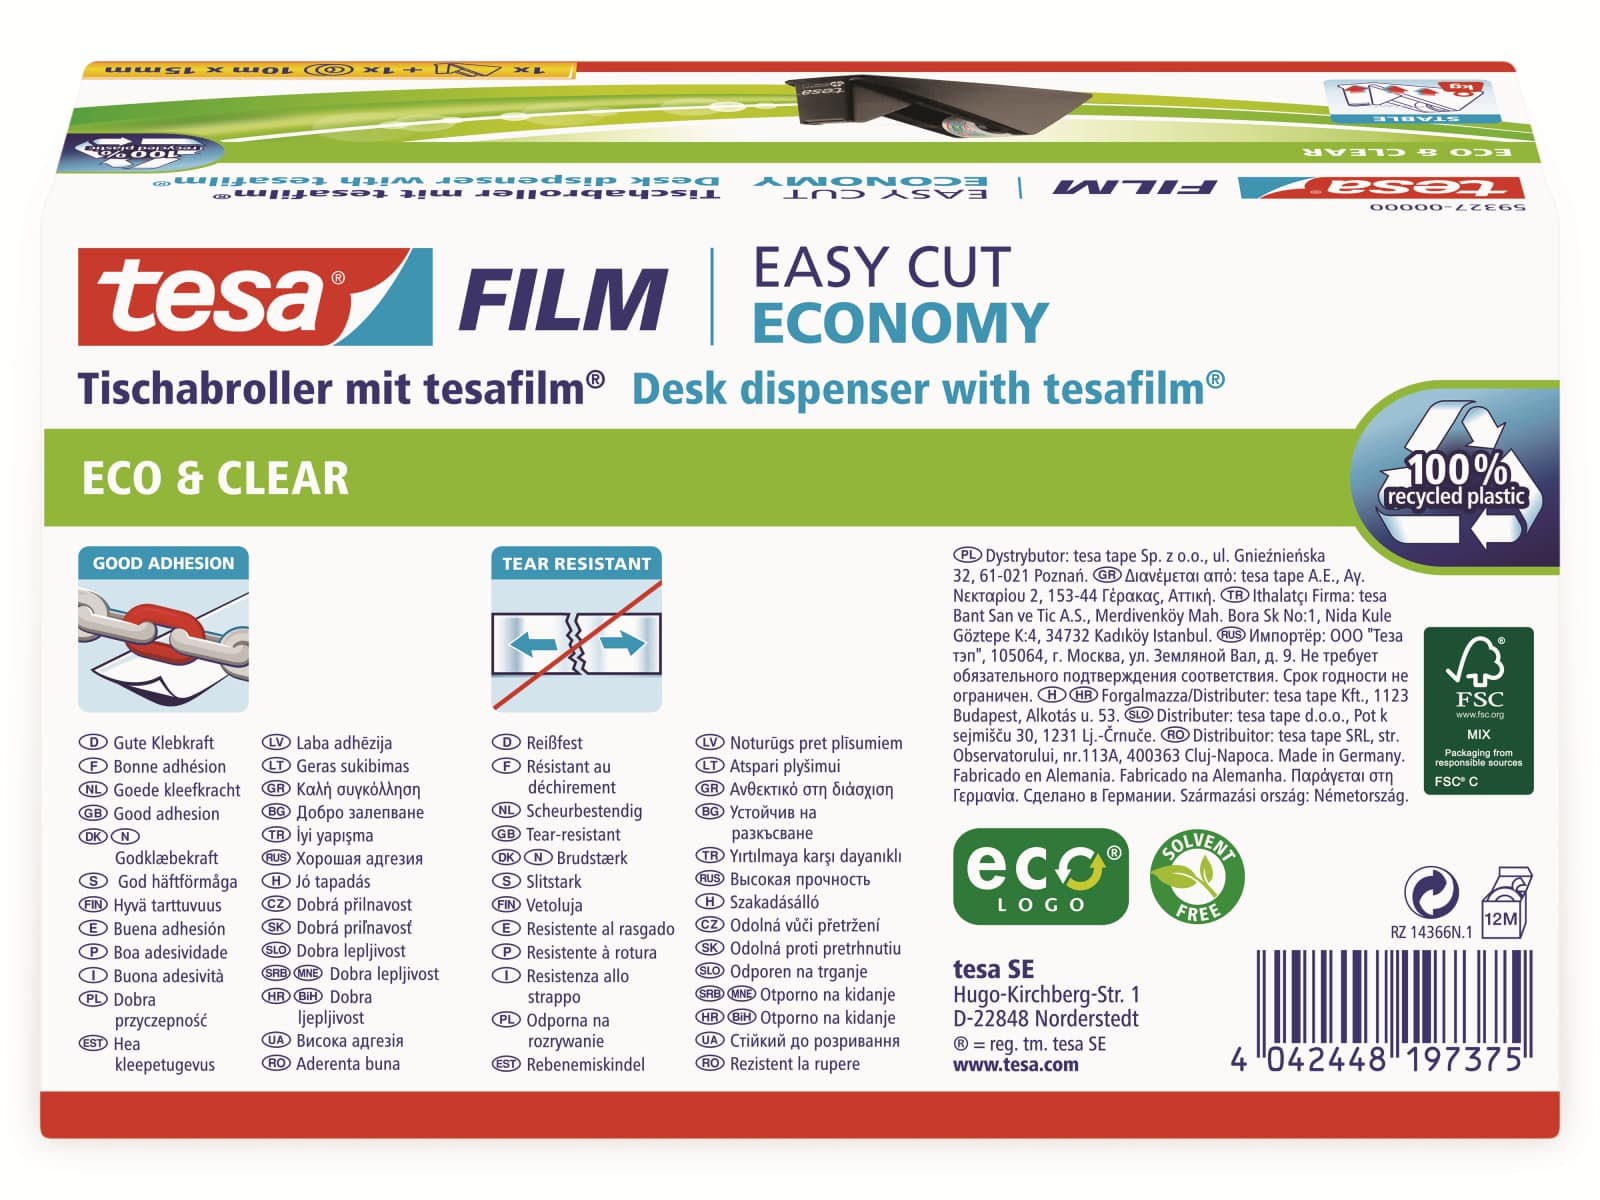 TESA film® Sparpack Abroller + film® eco&clear, 1 Rolle 10m:15mm, 59327-00000-02